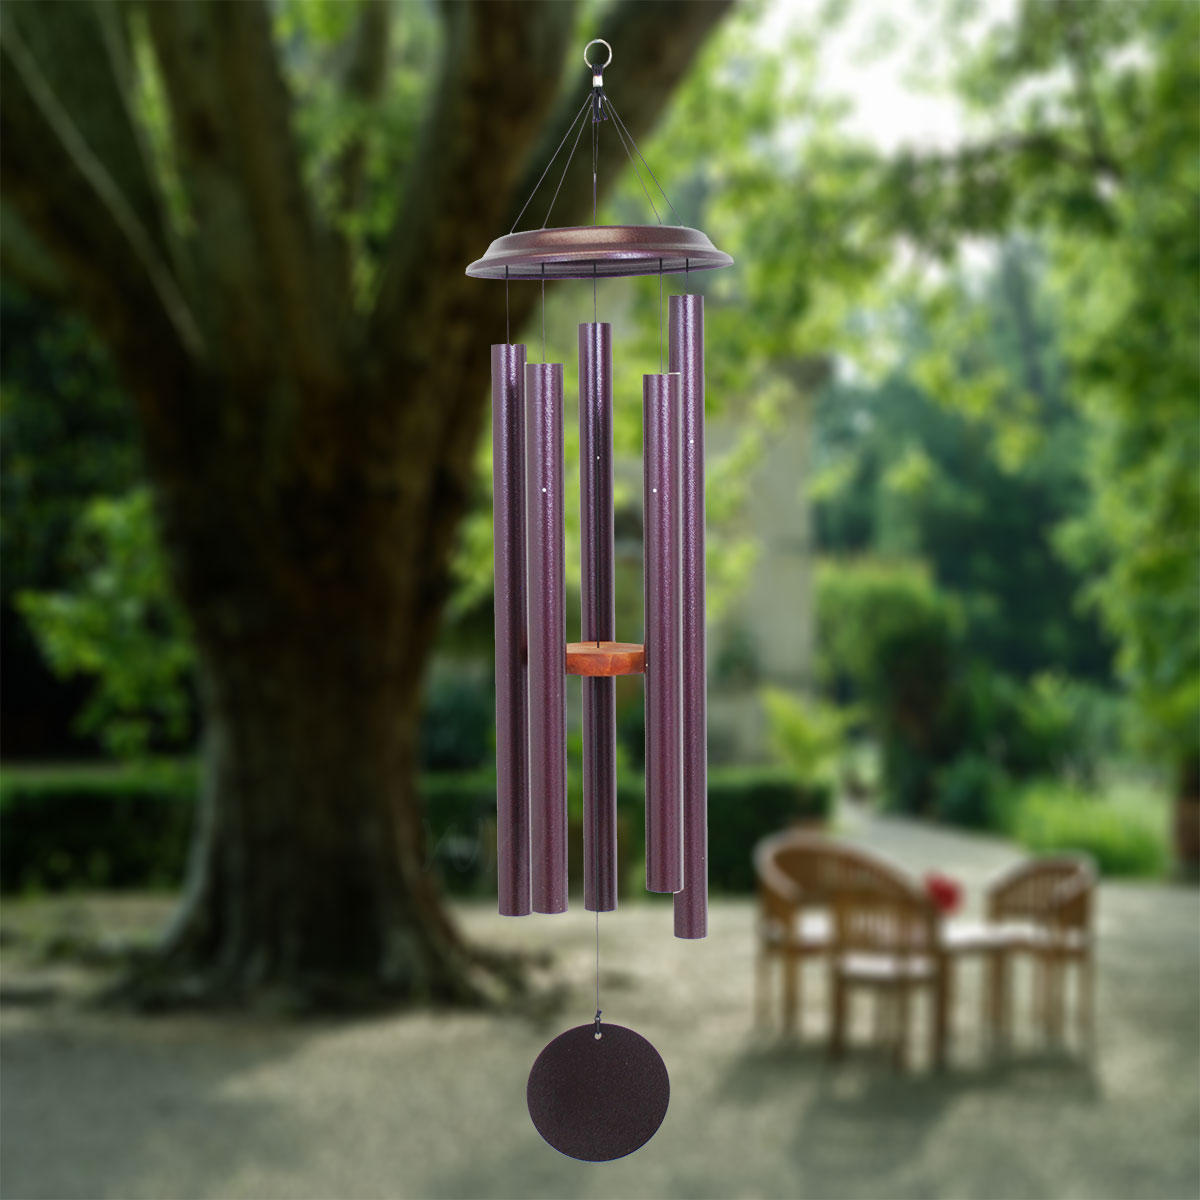 Shenandoah Melodies 47 Inch Plum Wind Chime - Scale Of B